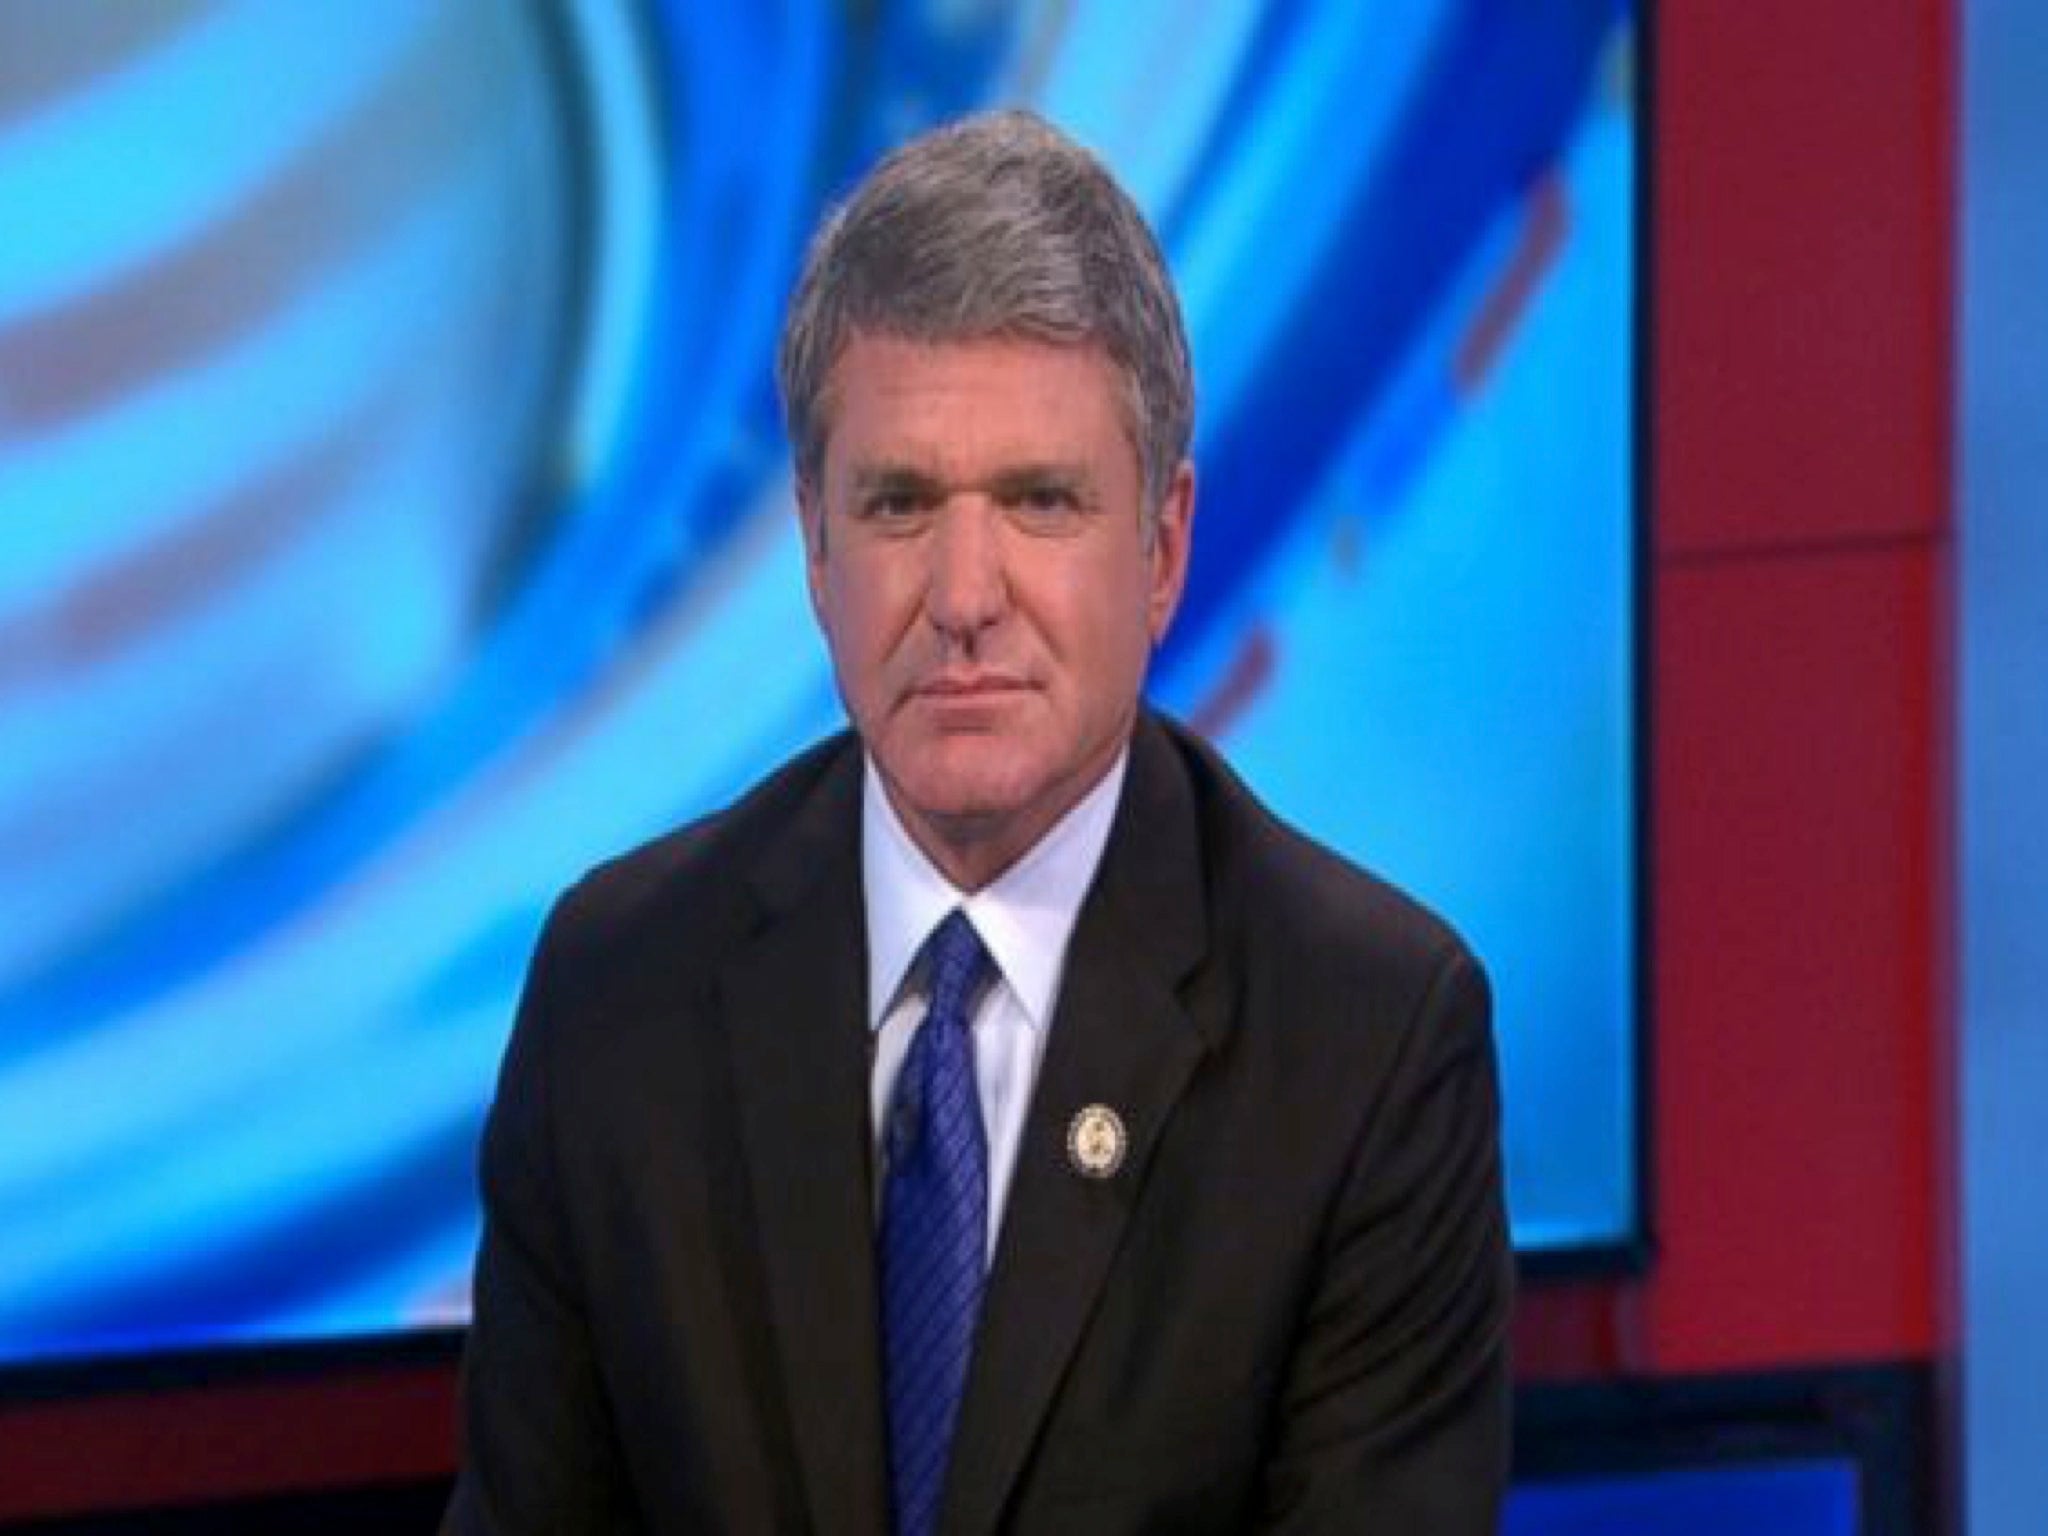 Rep Michael McCaul said he had been briefed by the Secret Service